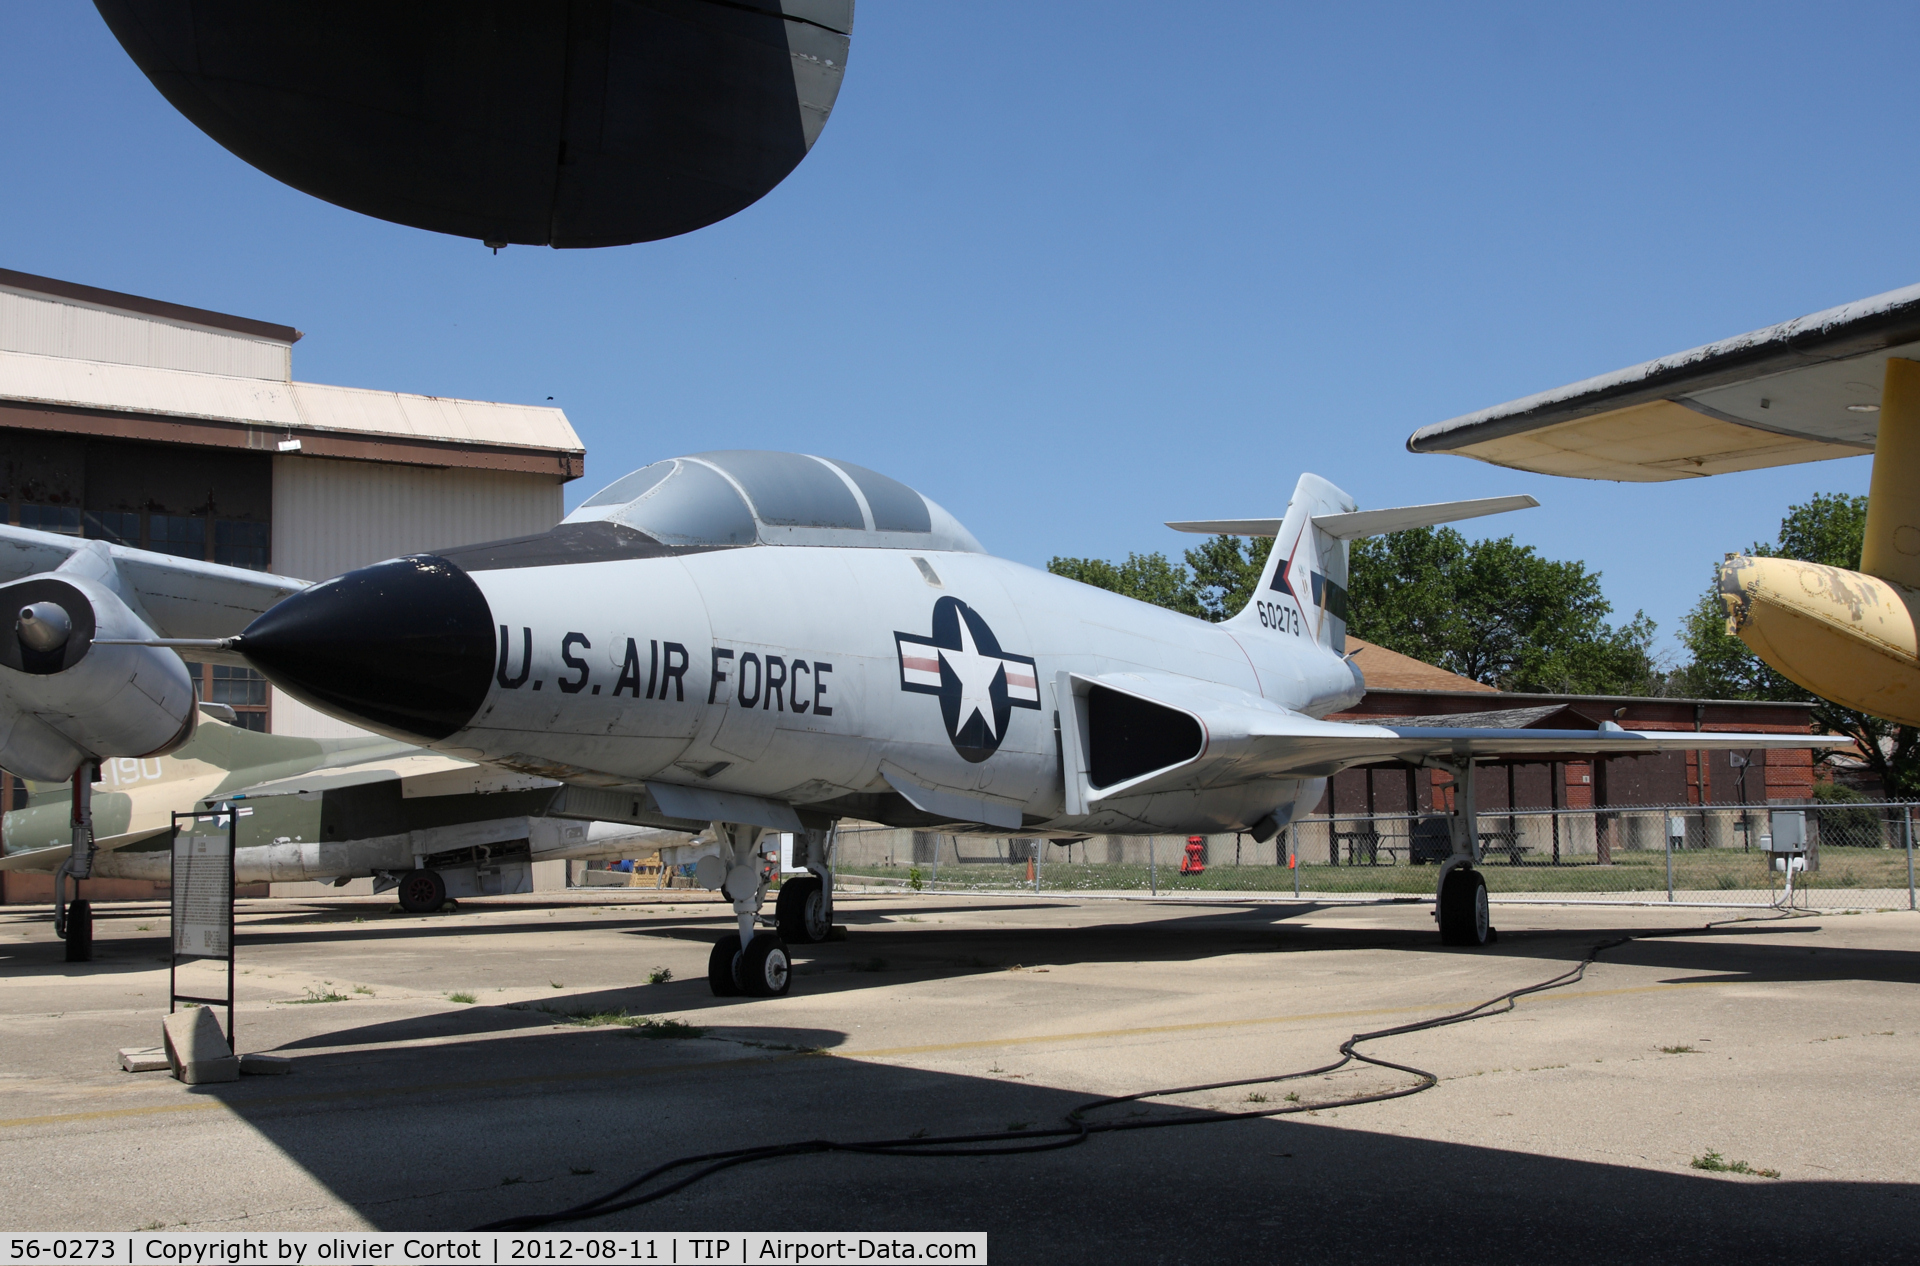 56-0273, 1956 McDonnell F-101B-70-MC Voodoo C/N 330, part of the great chanute museum